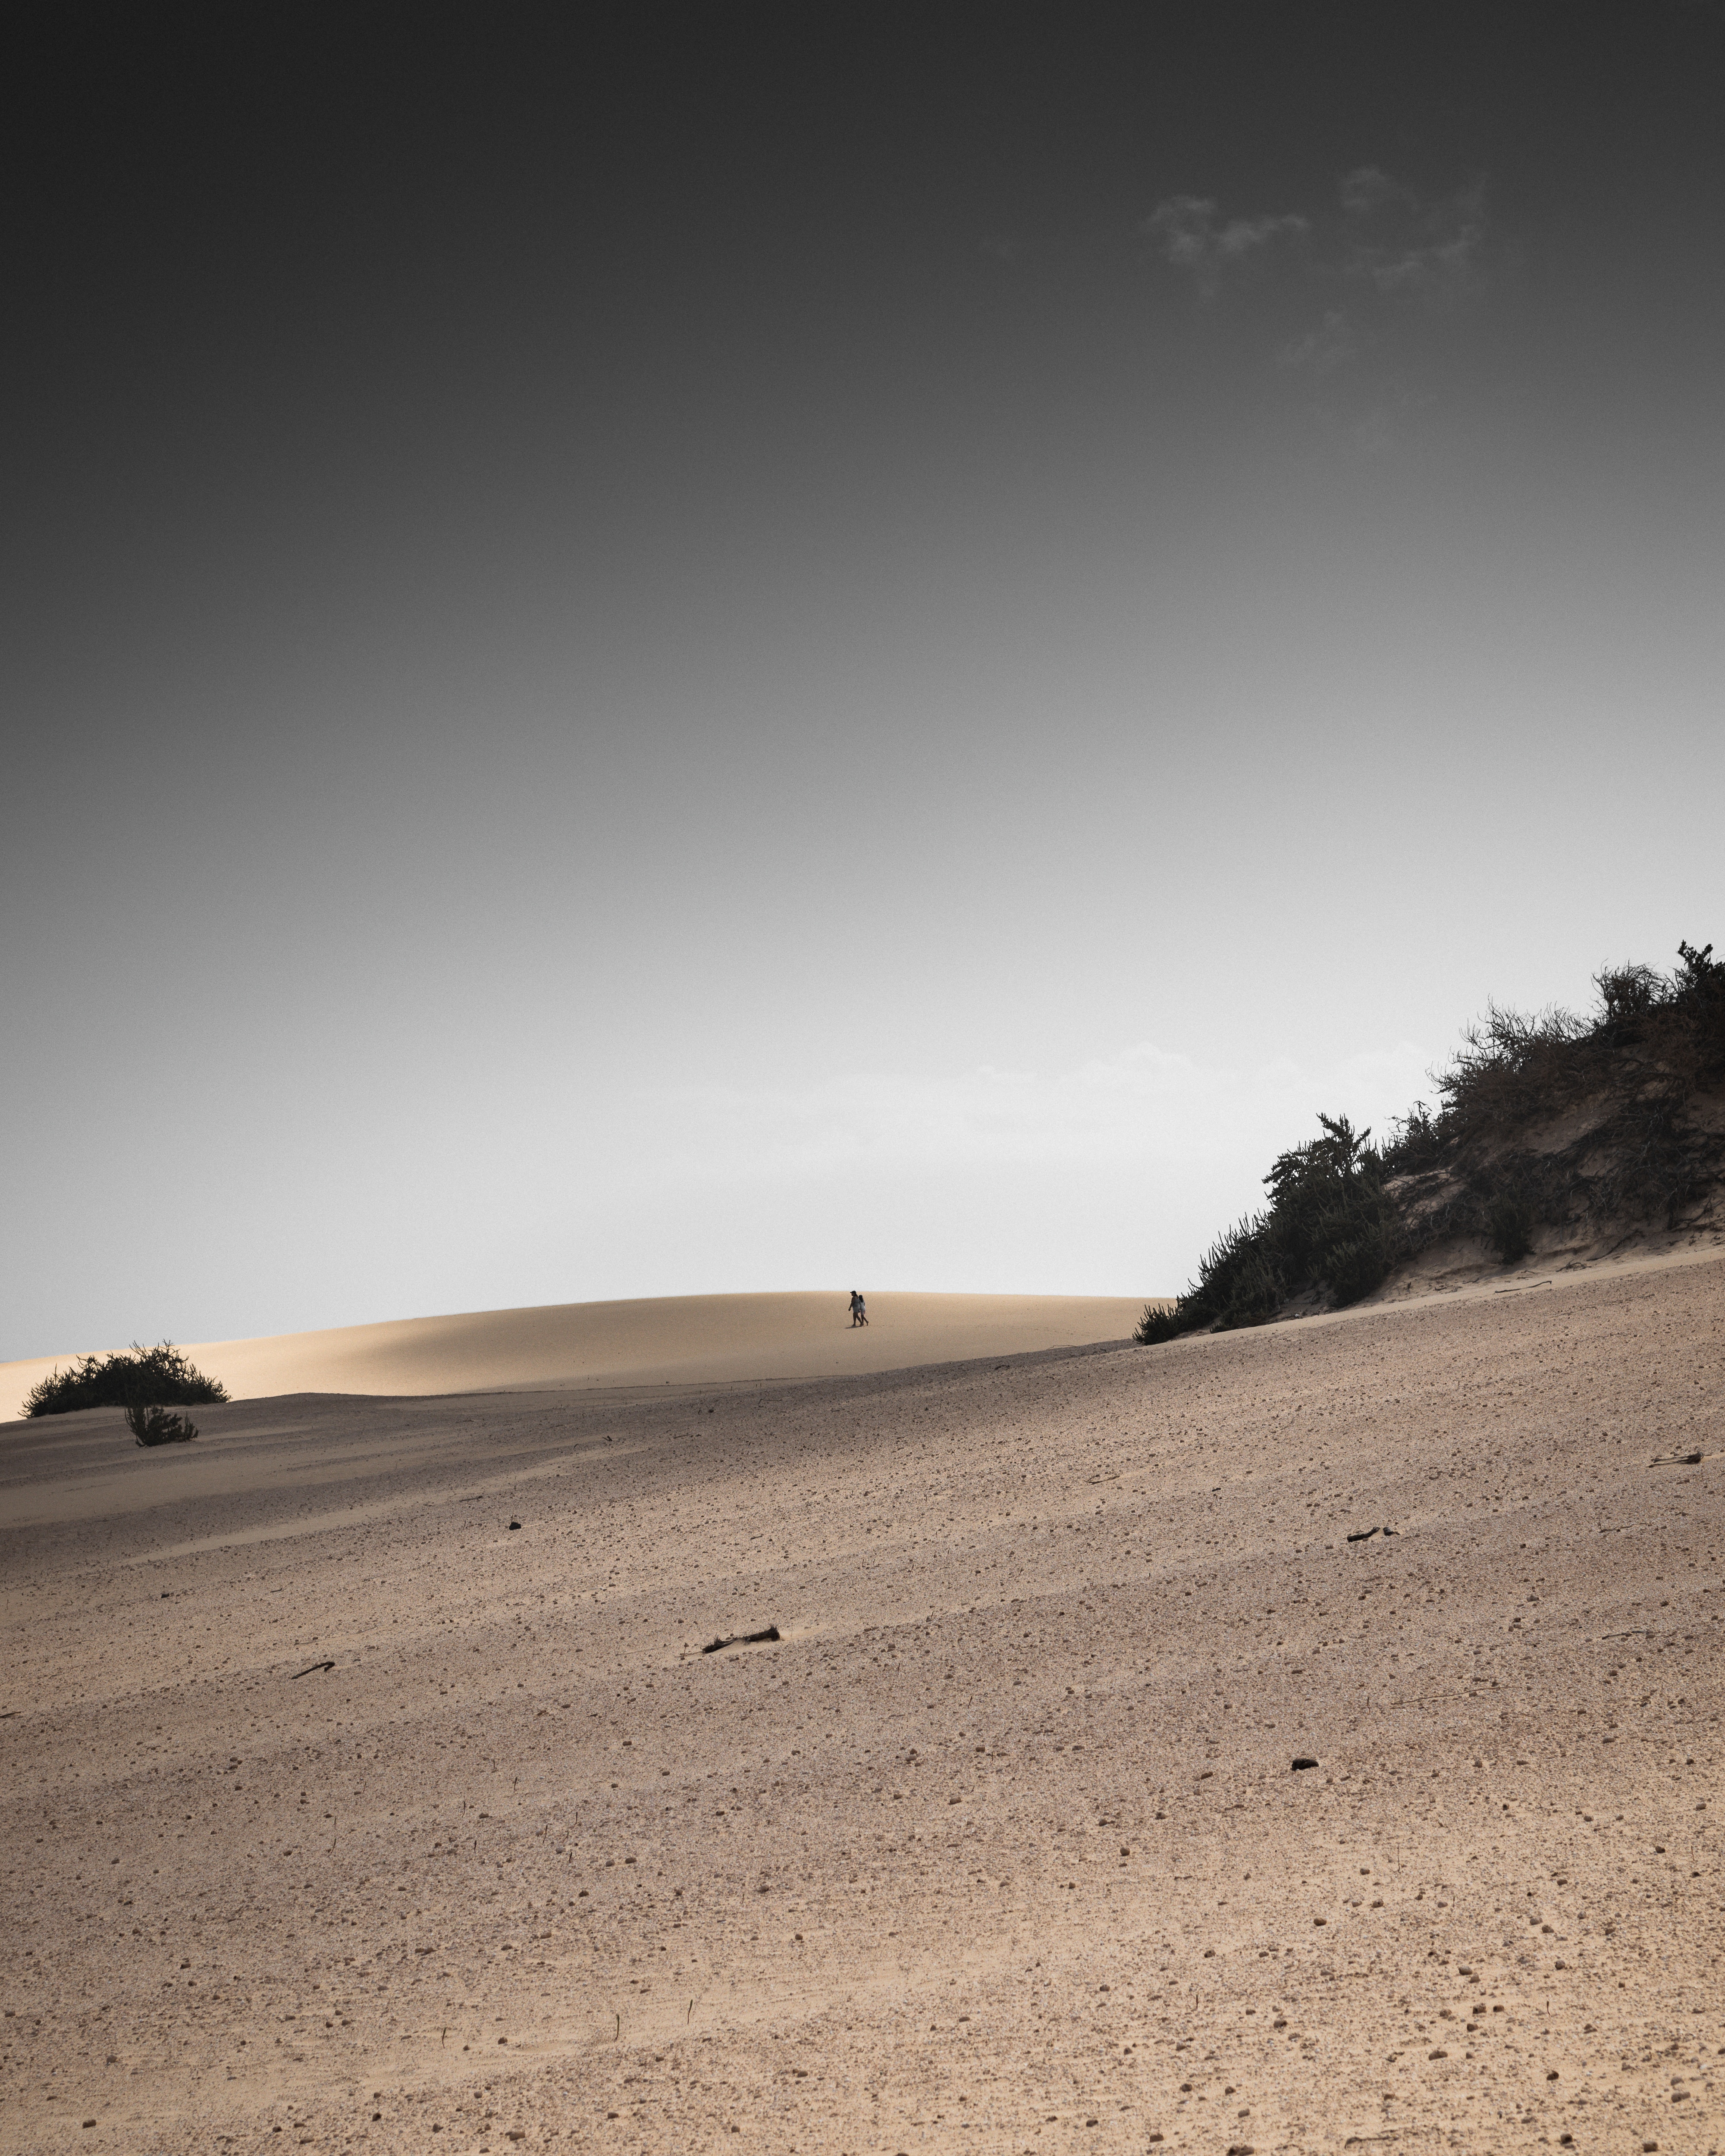 desert, landscape, nature, sand, silhouettes, hilly